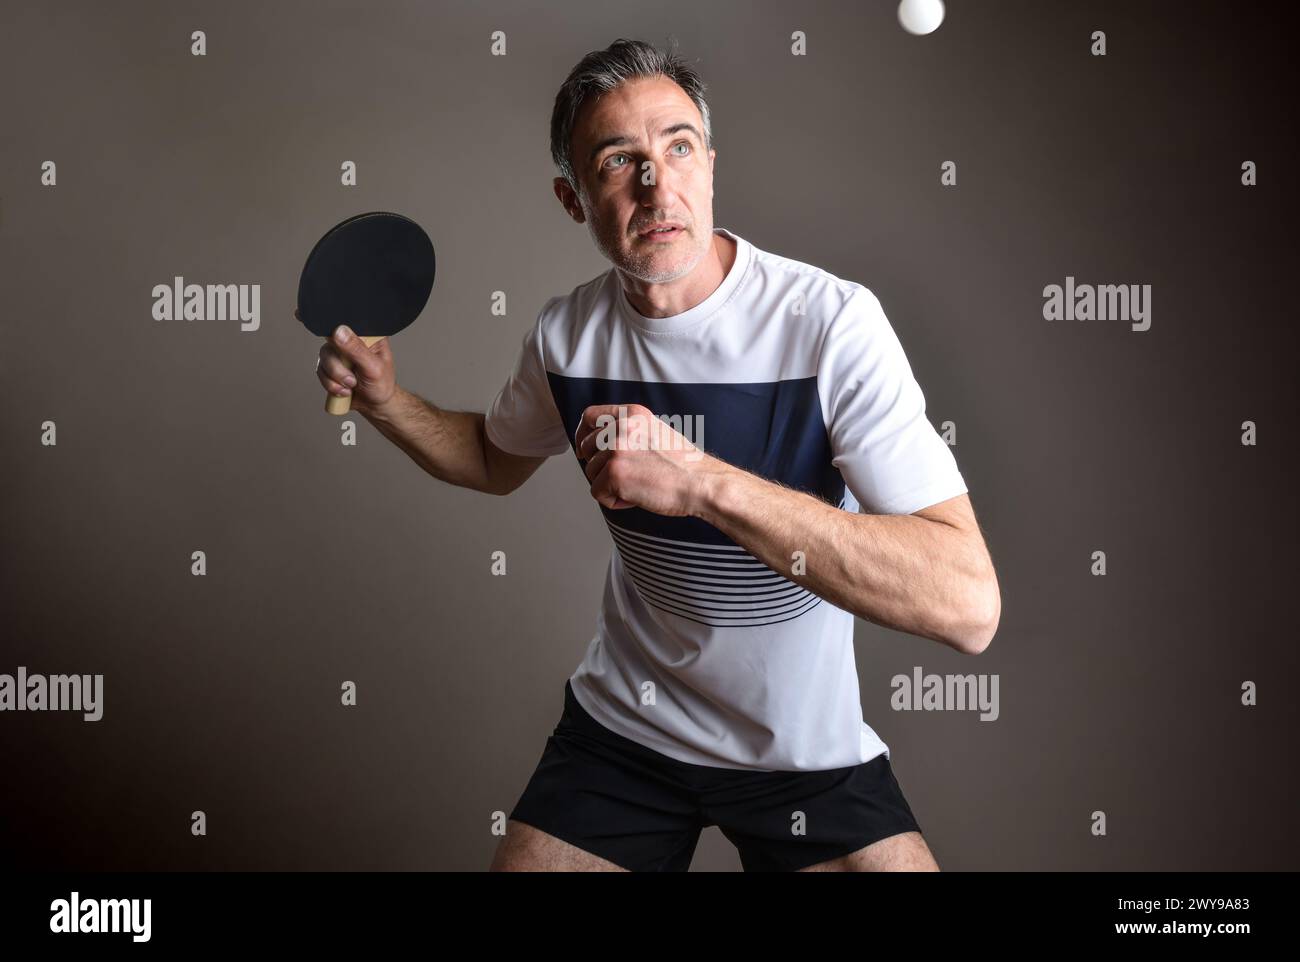 Detail of a professional ping-pong player going to hit a white ball on an isolated gray background. Stock Photo